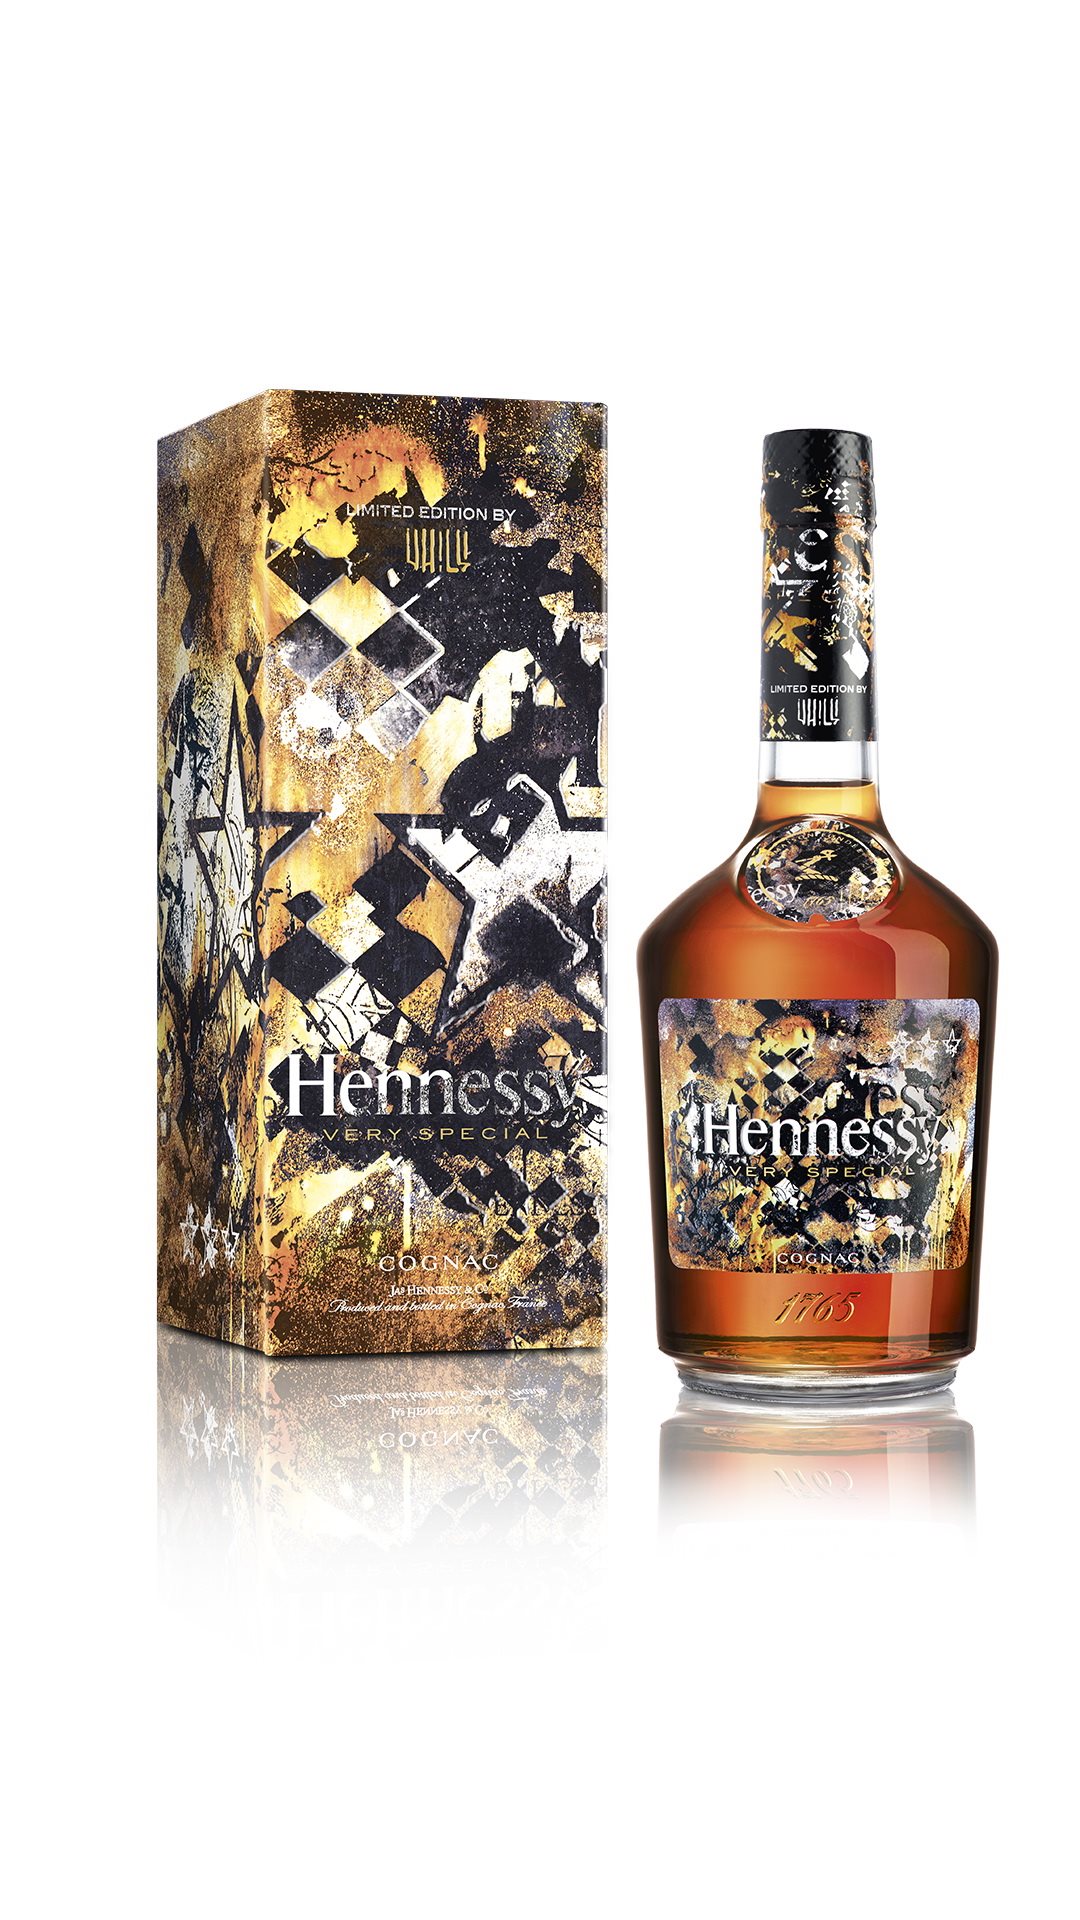 08 Hennessy_VS_Limited_Edition_by_Vhils_-_Bottle_and_Giftbox